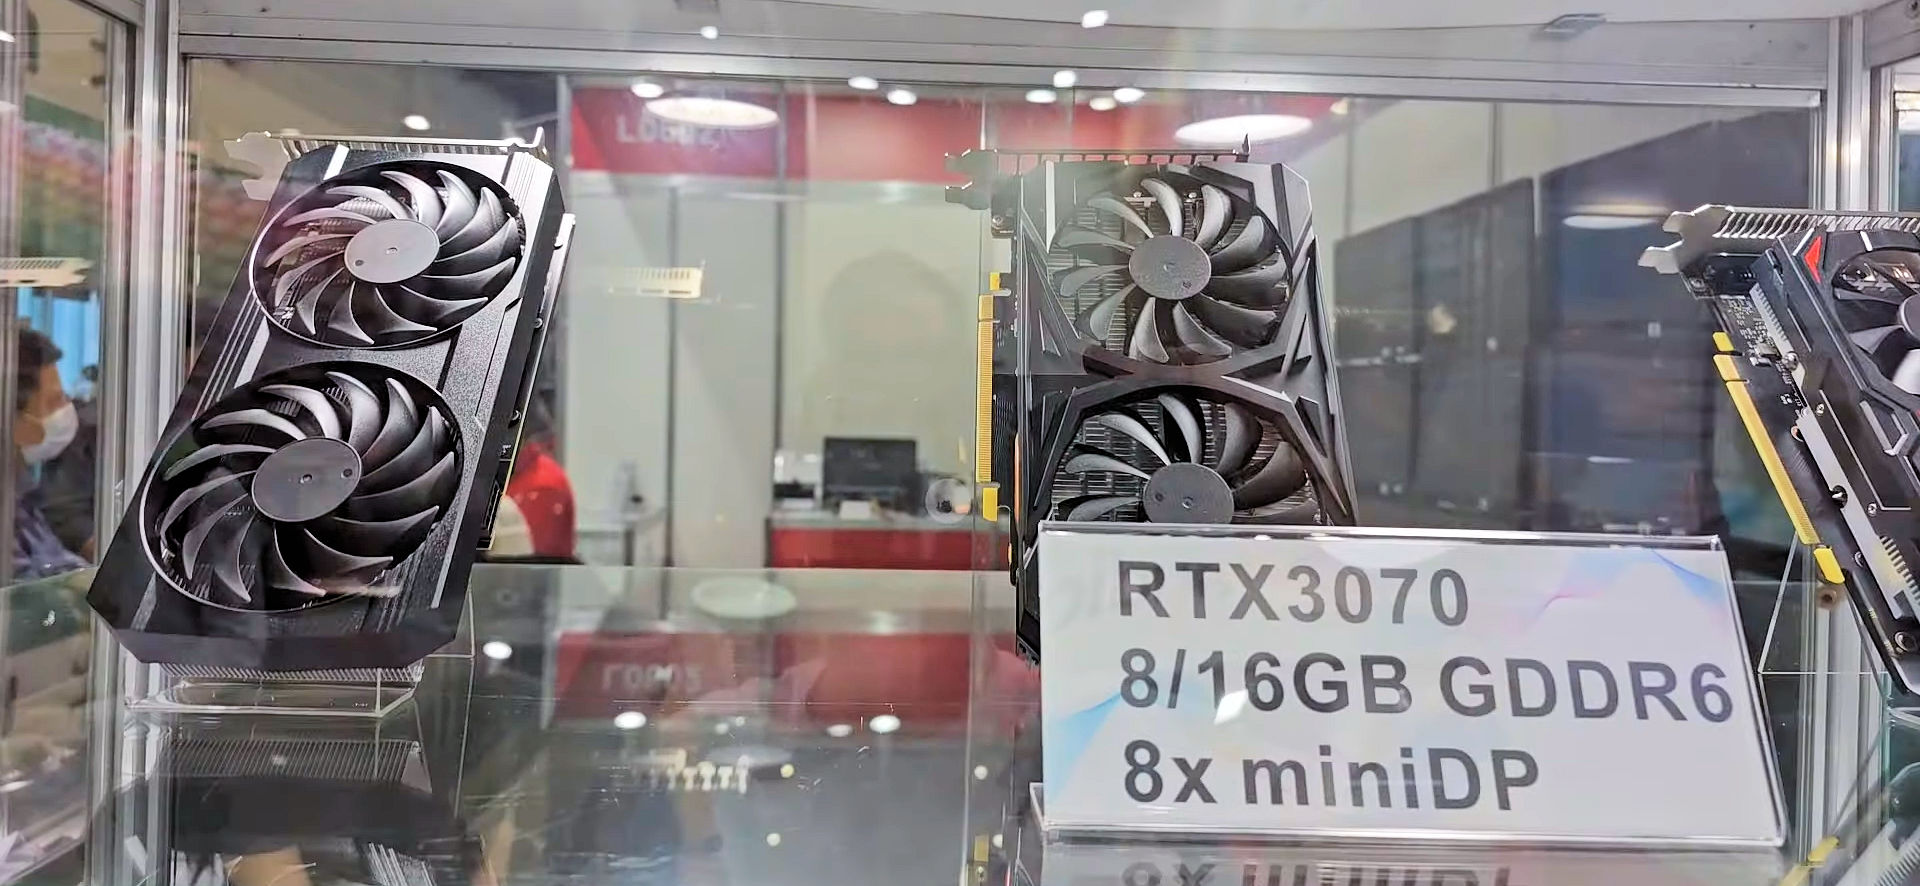 GALAX Reveals NVIDIA GeForce RTX 4080 12GB Has More Than Memory Cut From  16GB Model